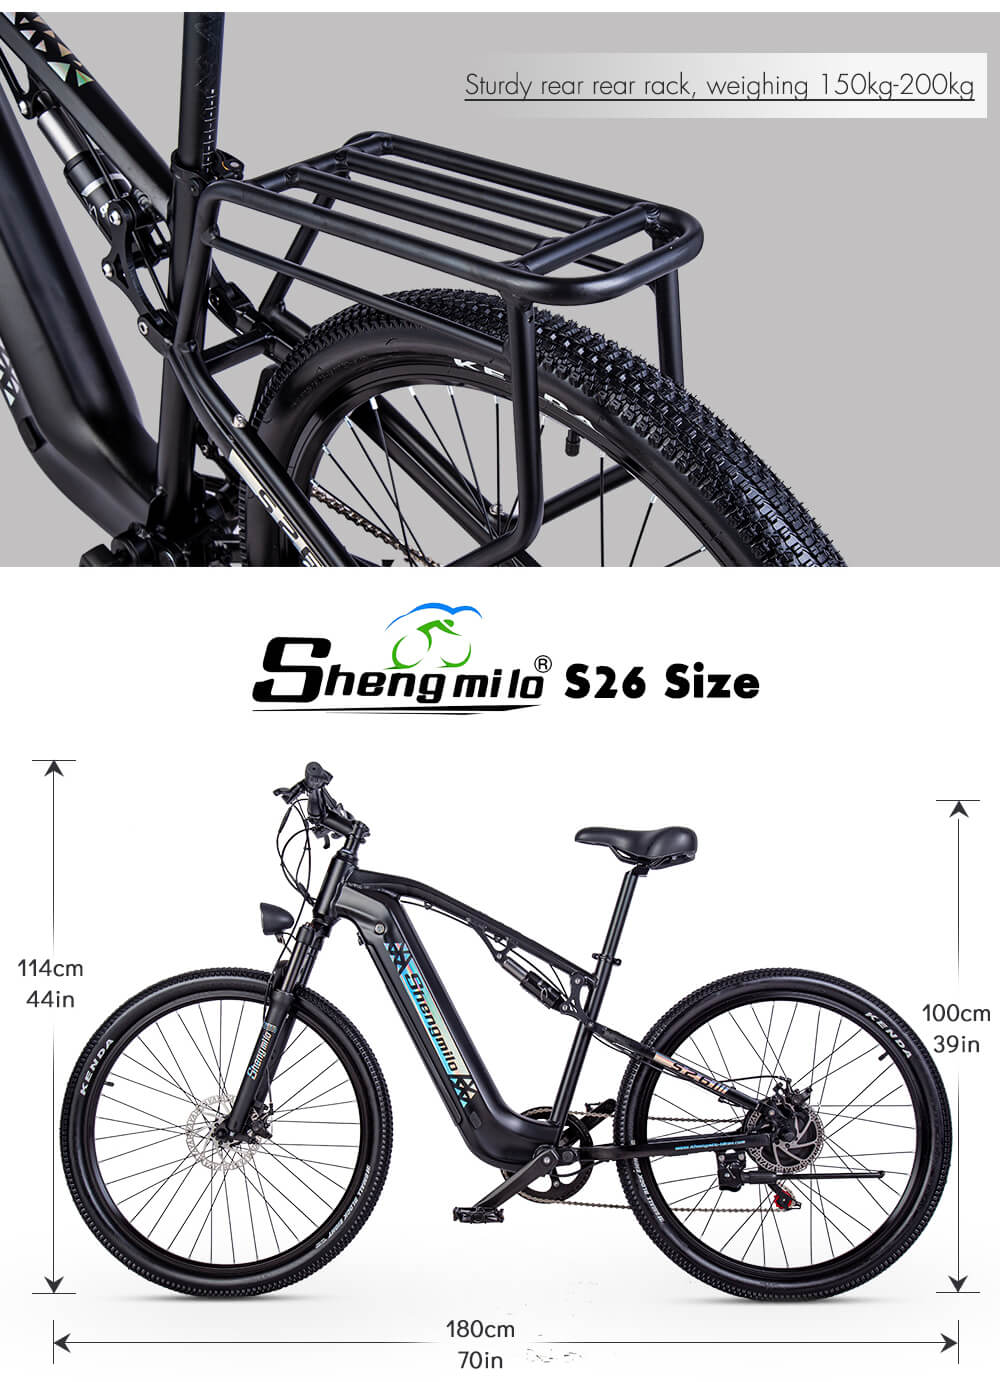 Shengmilo s26 comes with a sturdy rear seat frame. Worry-free transport of people and cargo